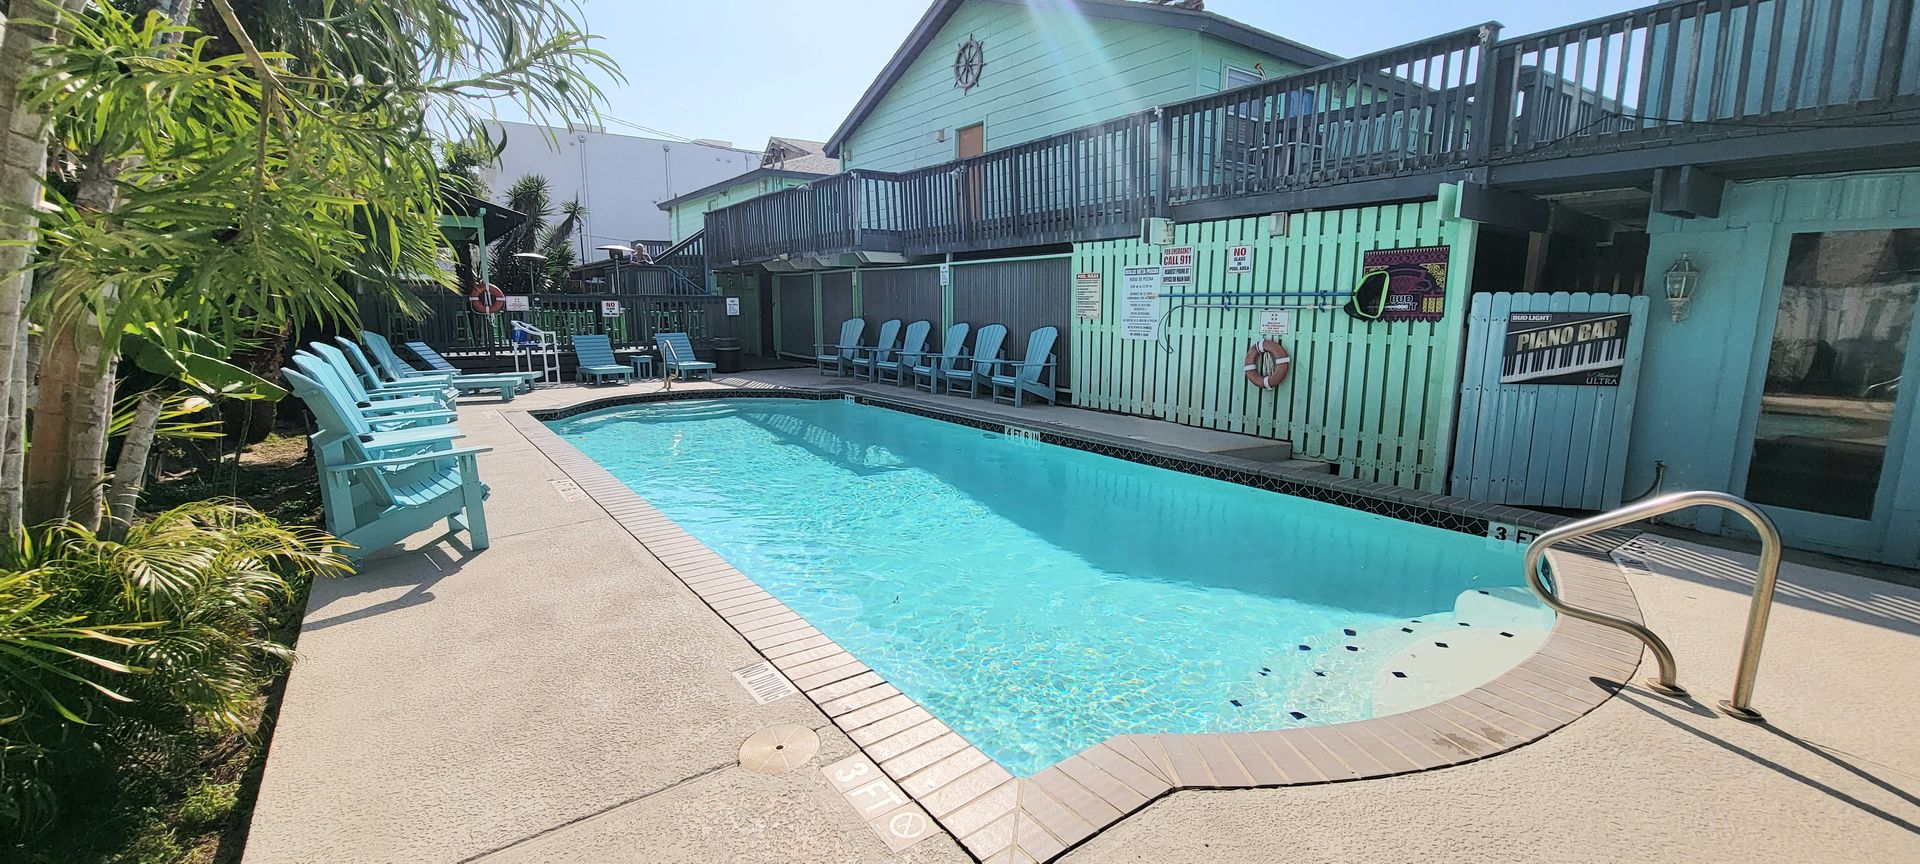 there is a large swimming pool in front of a house .